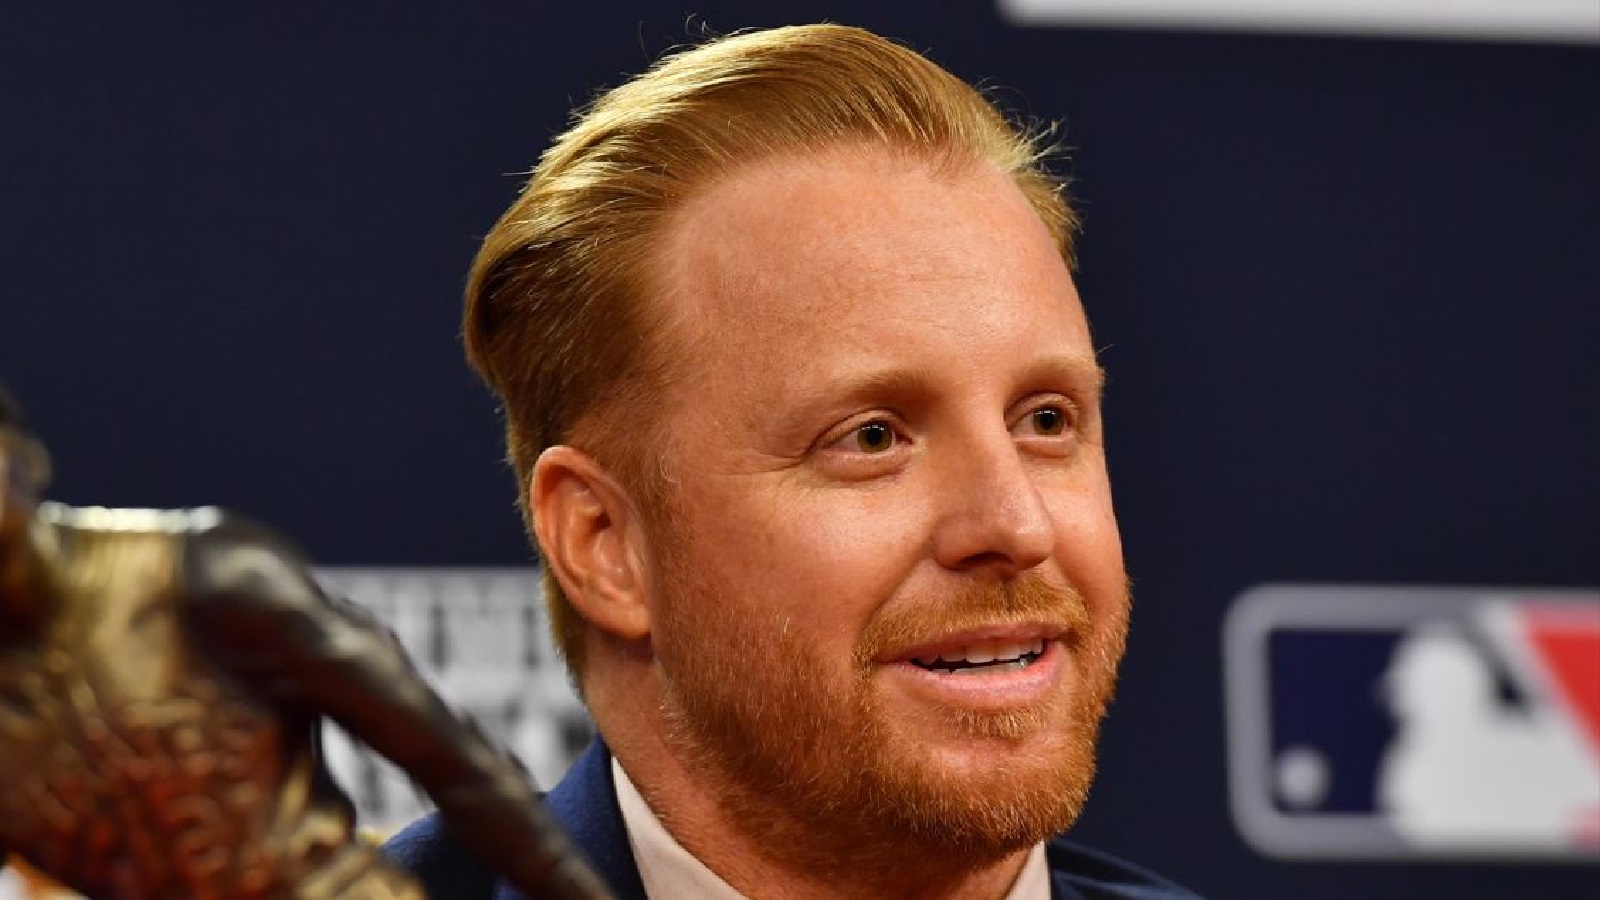 After being hit in face by pitch, Red Sox' Justin Turner tweets